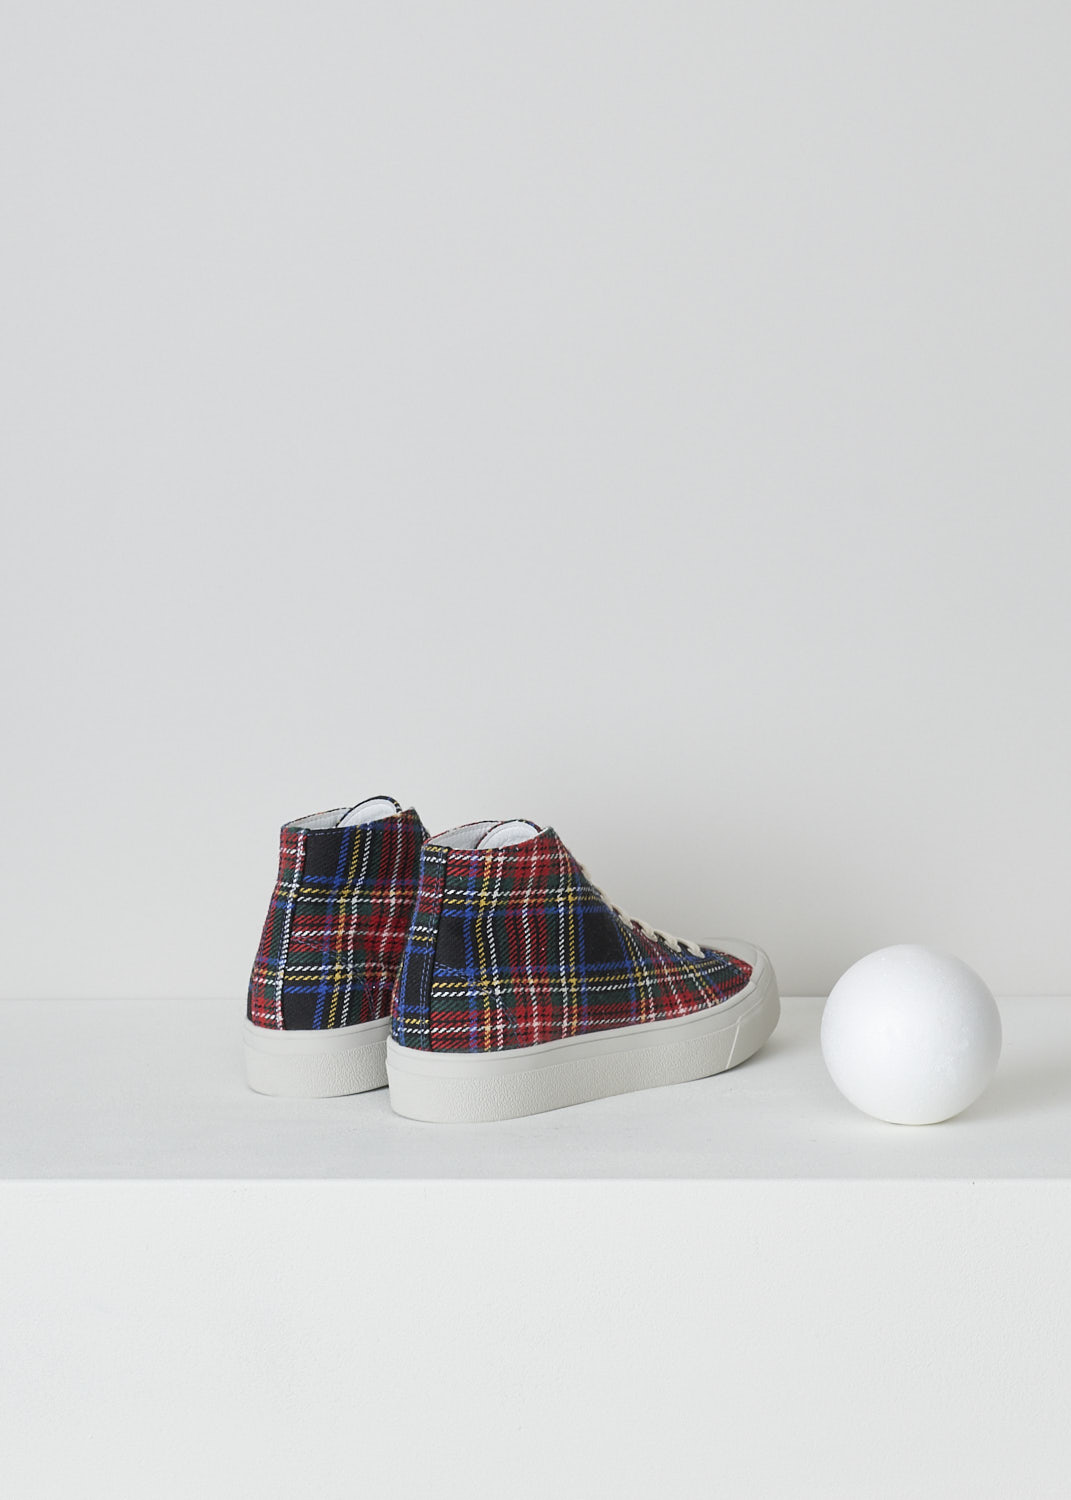 SOFIE Dâ€™HOORE, RED AND BLUE TARTAN SNEAKERS, FOSTER_WSCOT_TARTAN_4, Red, Blue, Print, Back, These high top sneakers with red and blue tartan print feature front lace-up fastening with white laces. These sneakers have a round toe with a white rubber toe cap. These shoes have white rubber soles.

